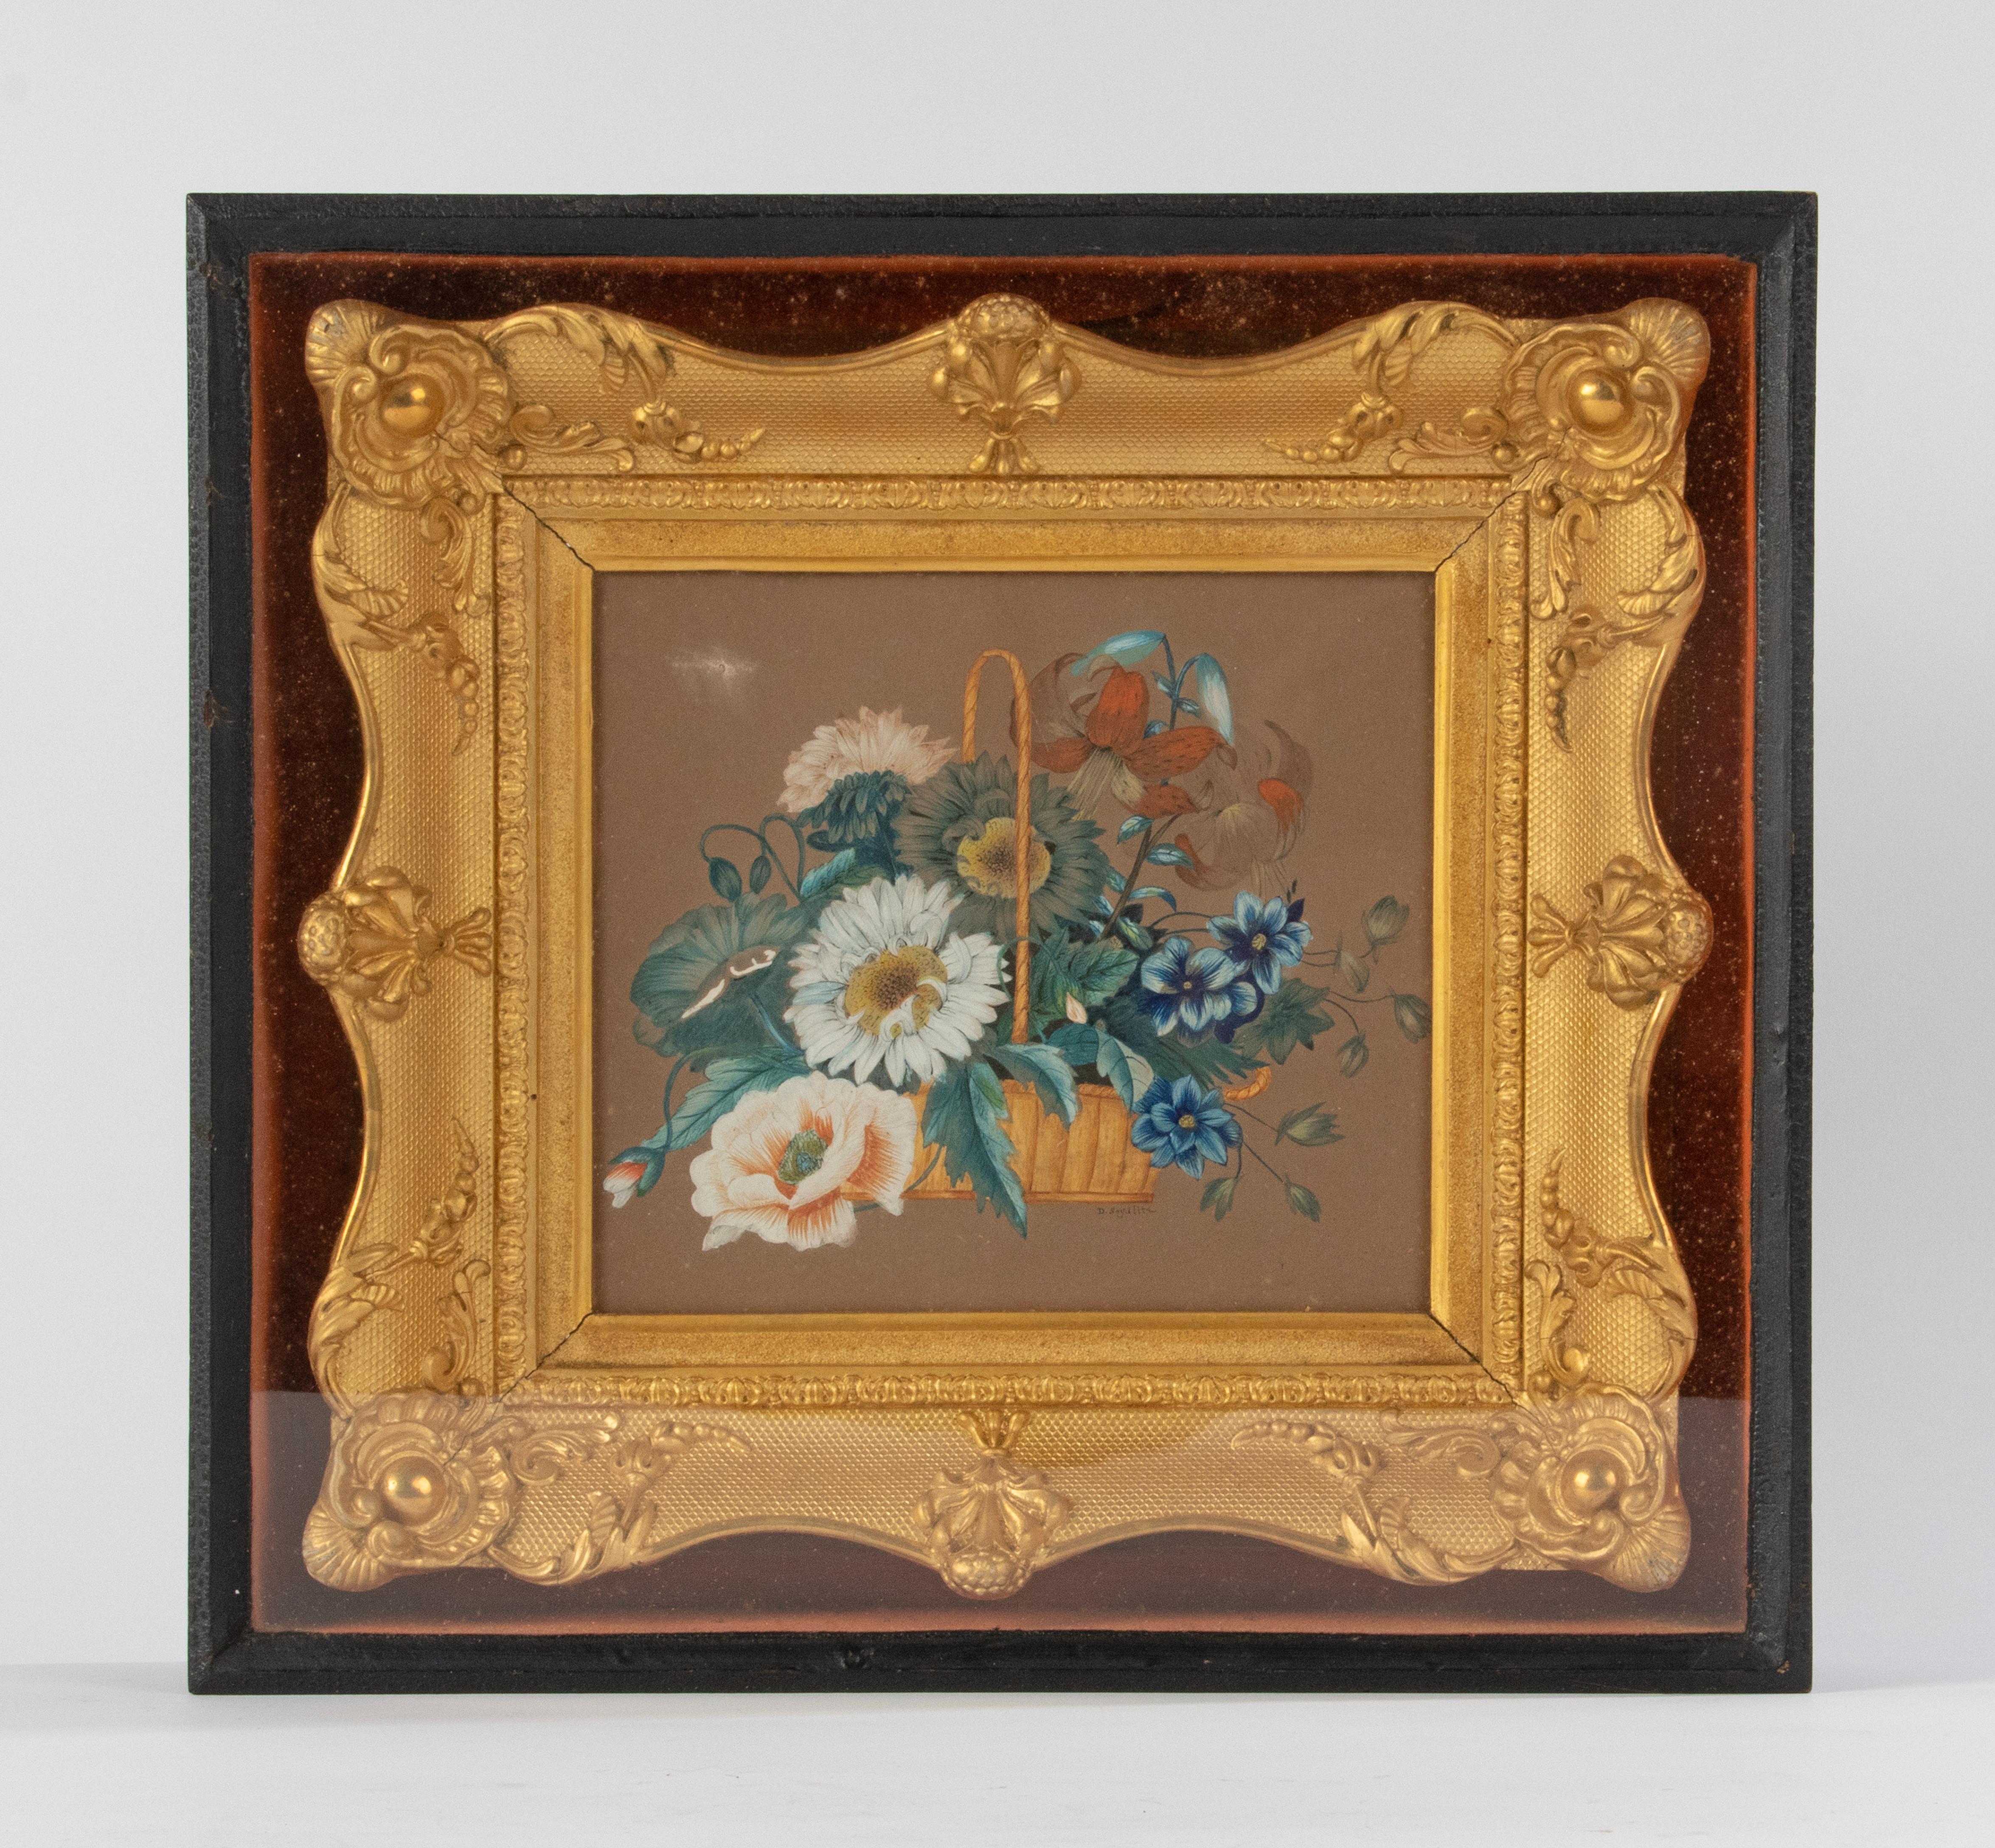 An antique gouache (watercolor) painting of a basket with flowers, painted on paper. Signed right under; D. Seydlitz. Origin unclear, probably Belgium, around 1870-1880. In a gold leaf gilded frame in French Règence style. The whole is in a pinewood